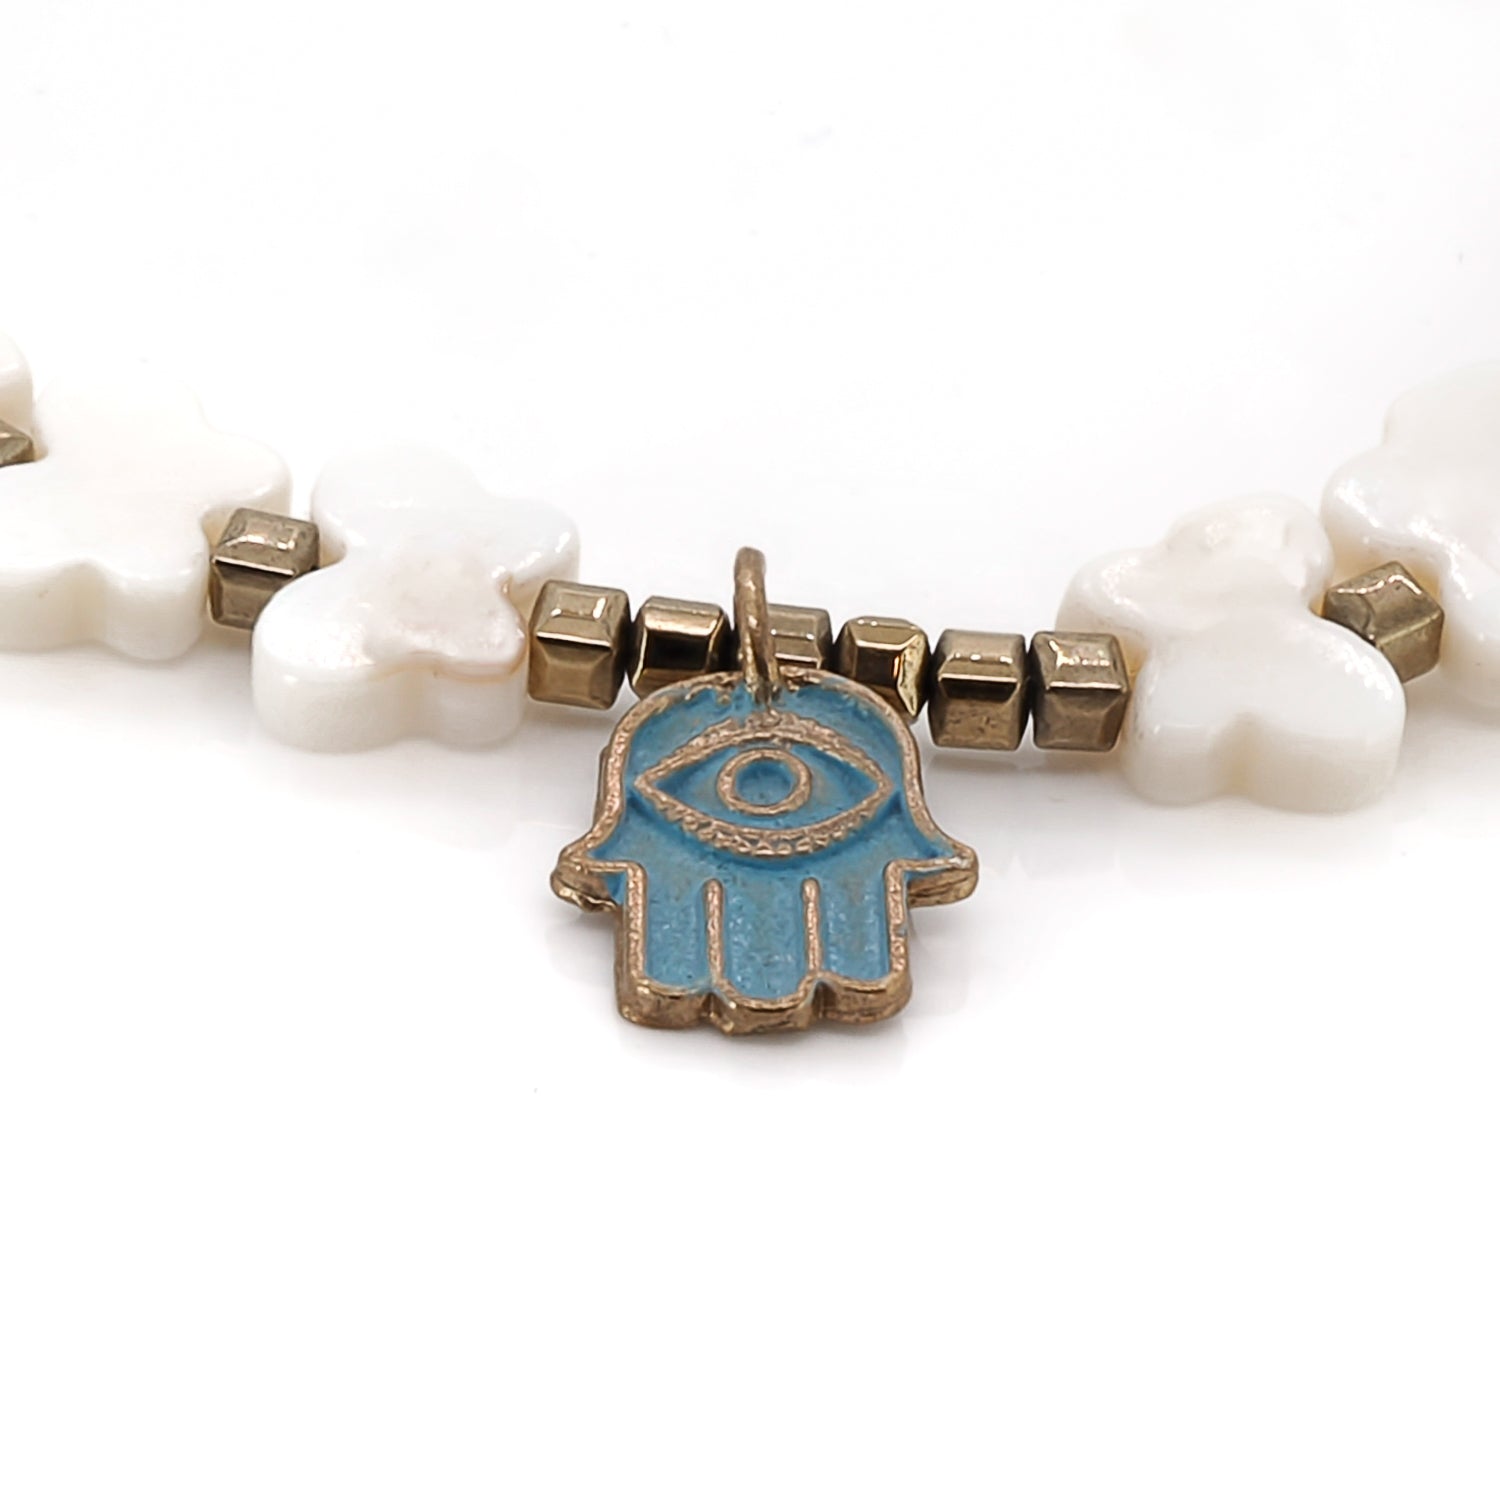 Gold Plated Hamsa Charm - Blue enamel with an evil eye for protection.